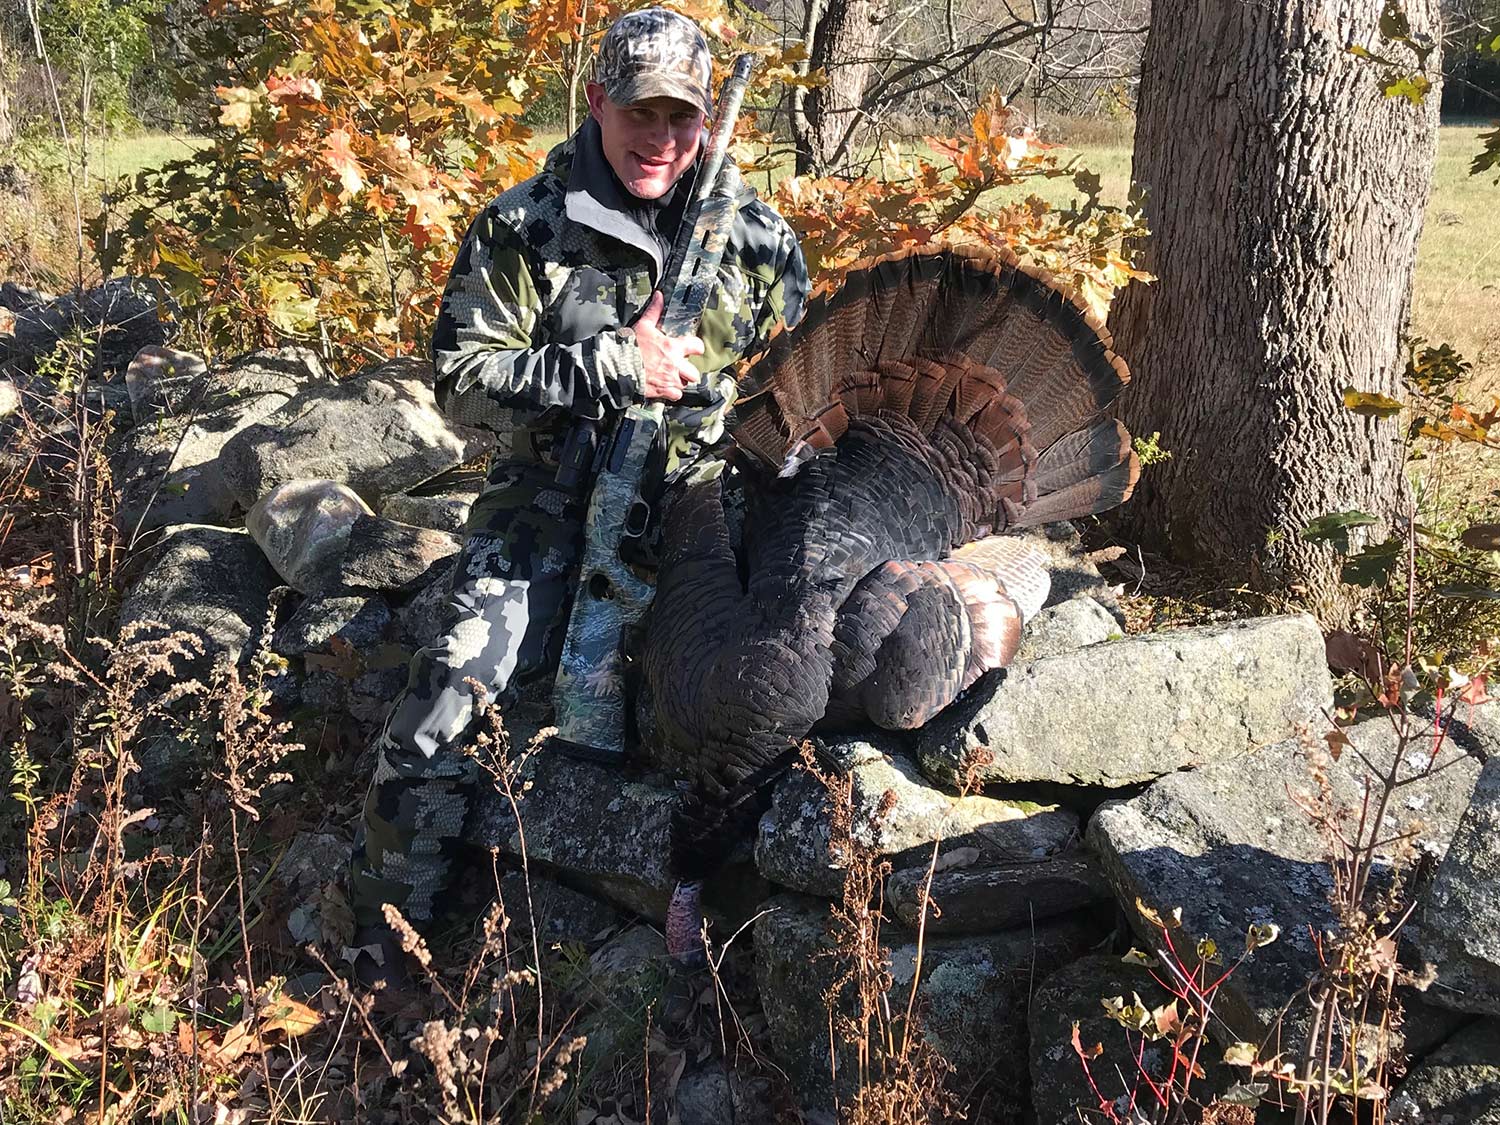 A hunter poses next to a turkey on a rock.